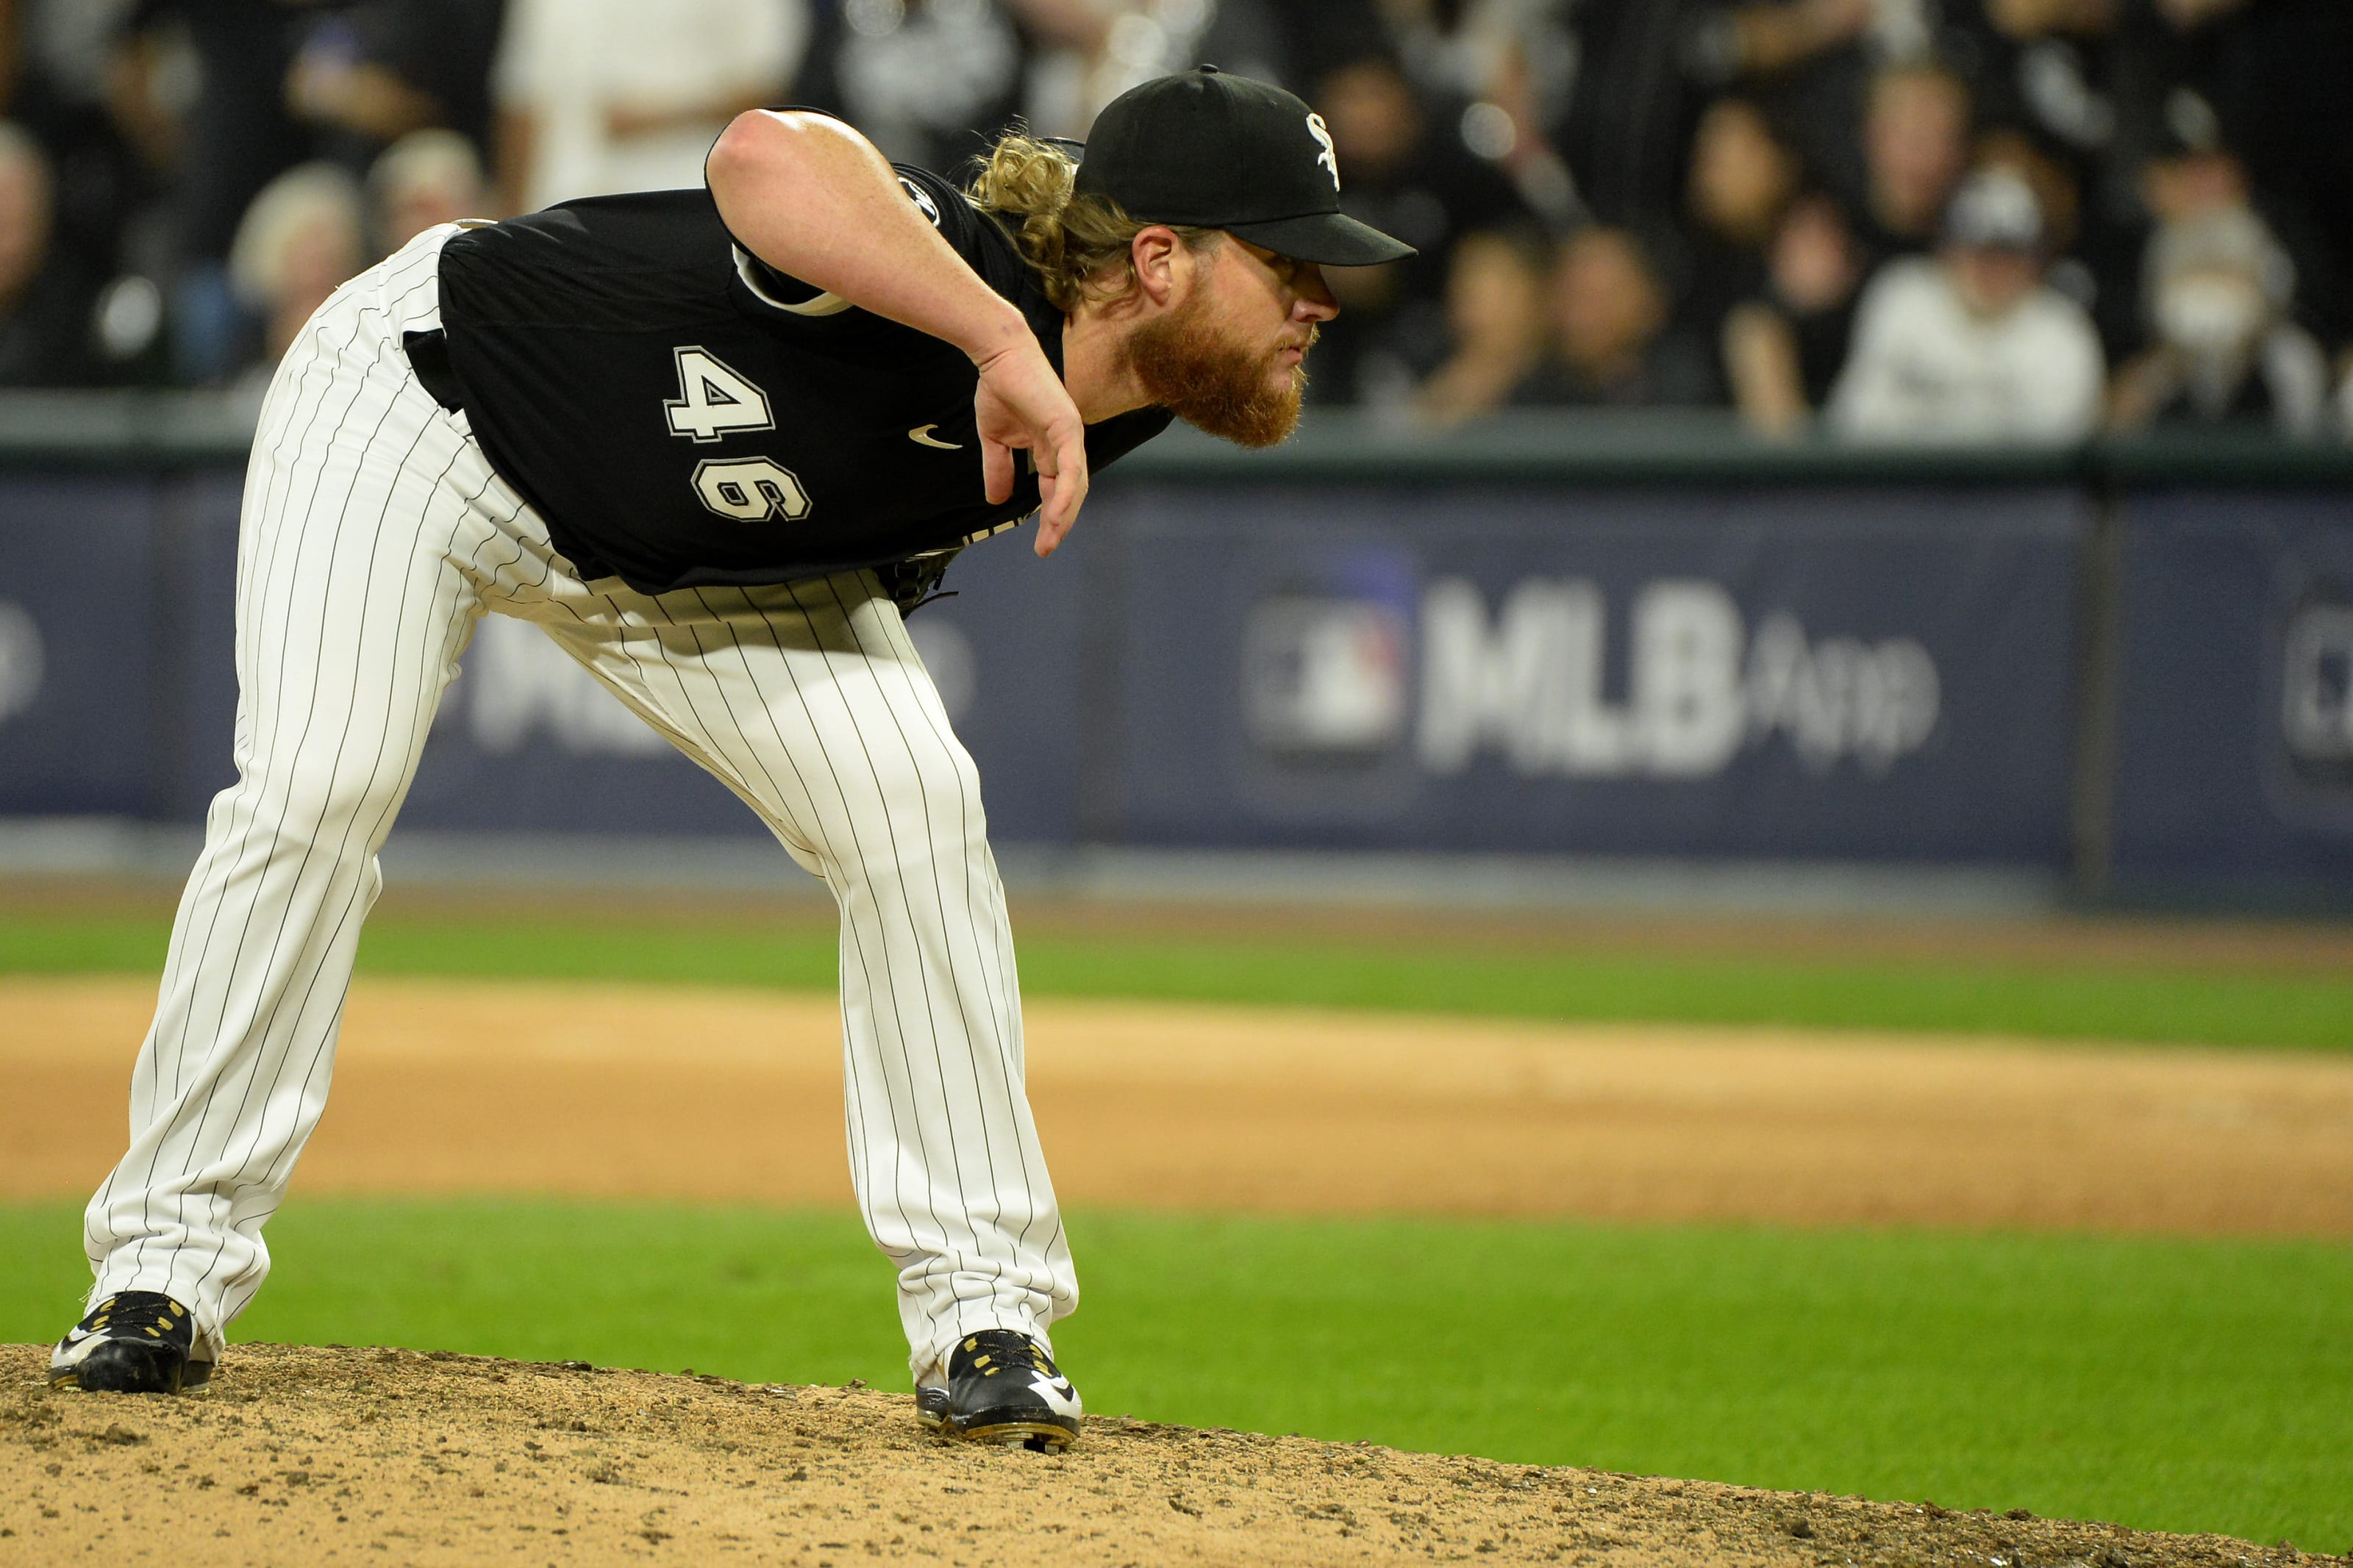 Craig Kimbrel #46 of the Chicago White Sox pitches.